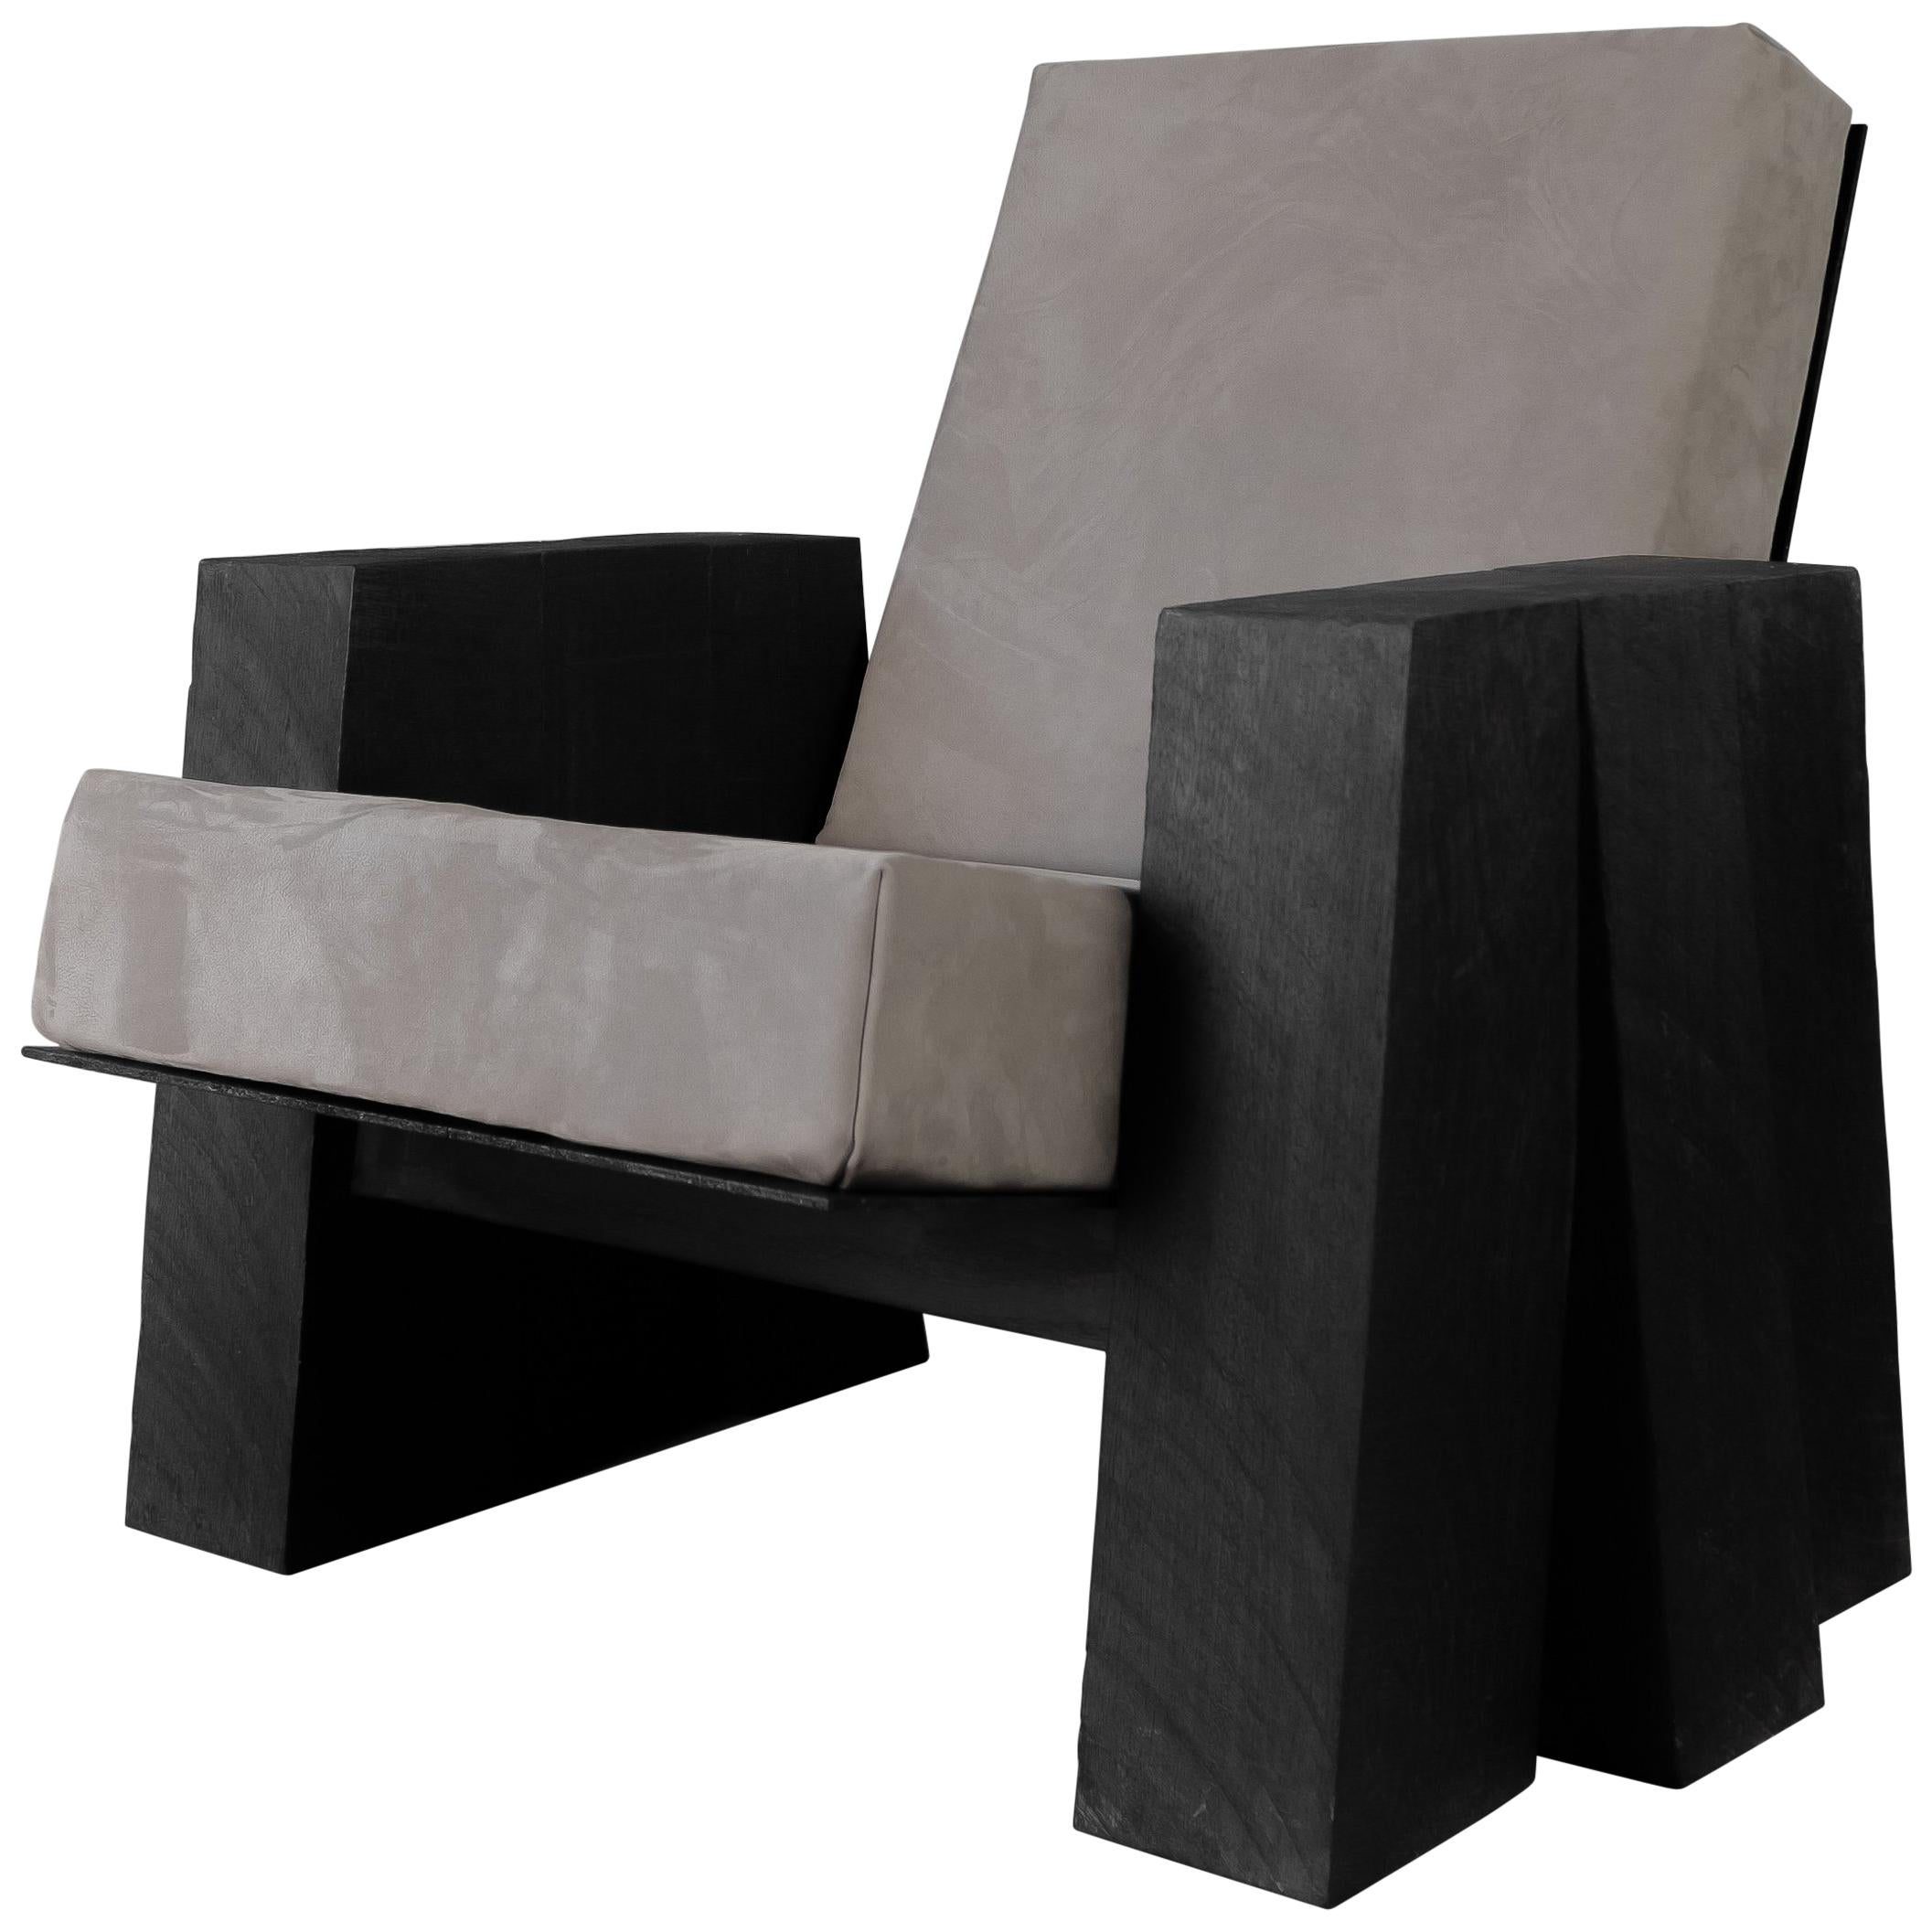 AD Lounge Chair, Sculpted Iroko Wood, Arno Declercq